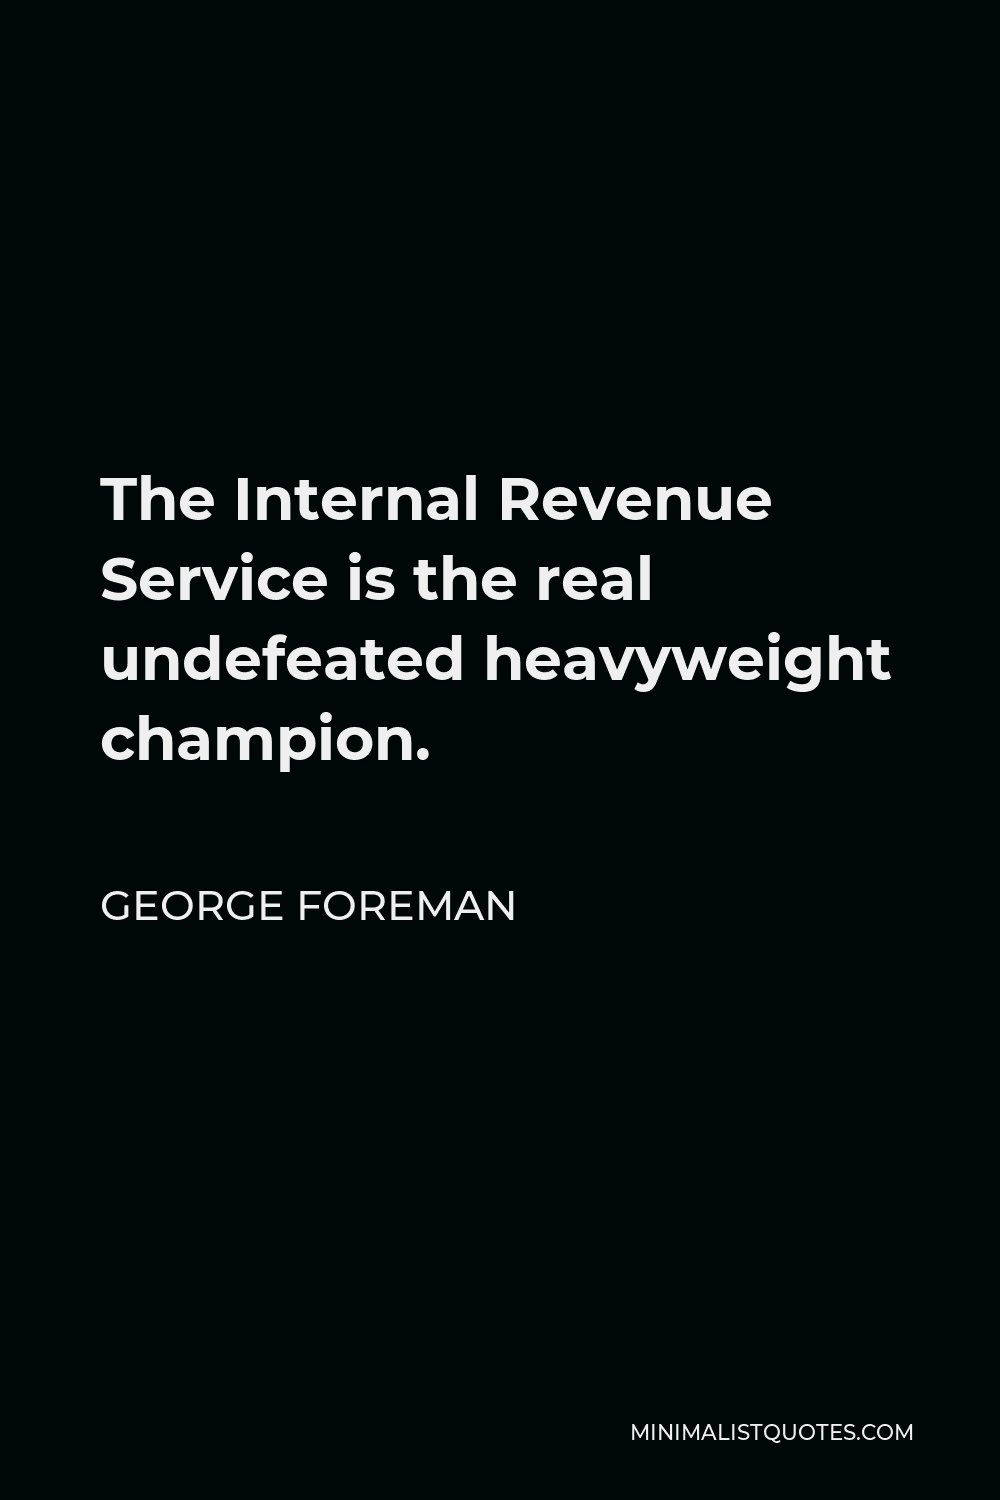 George Foreman Quote - The Internal Revenue Service is the real undefeated heavyweight champion.